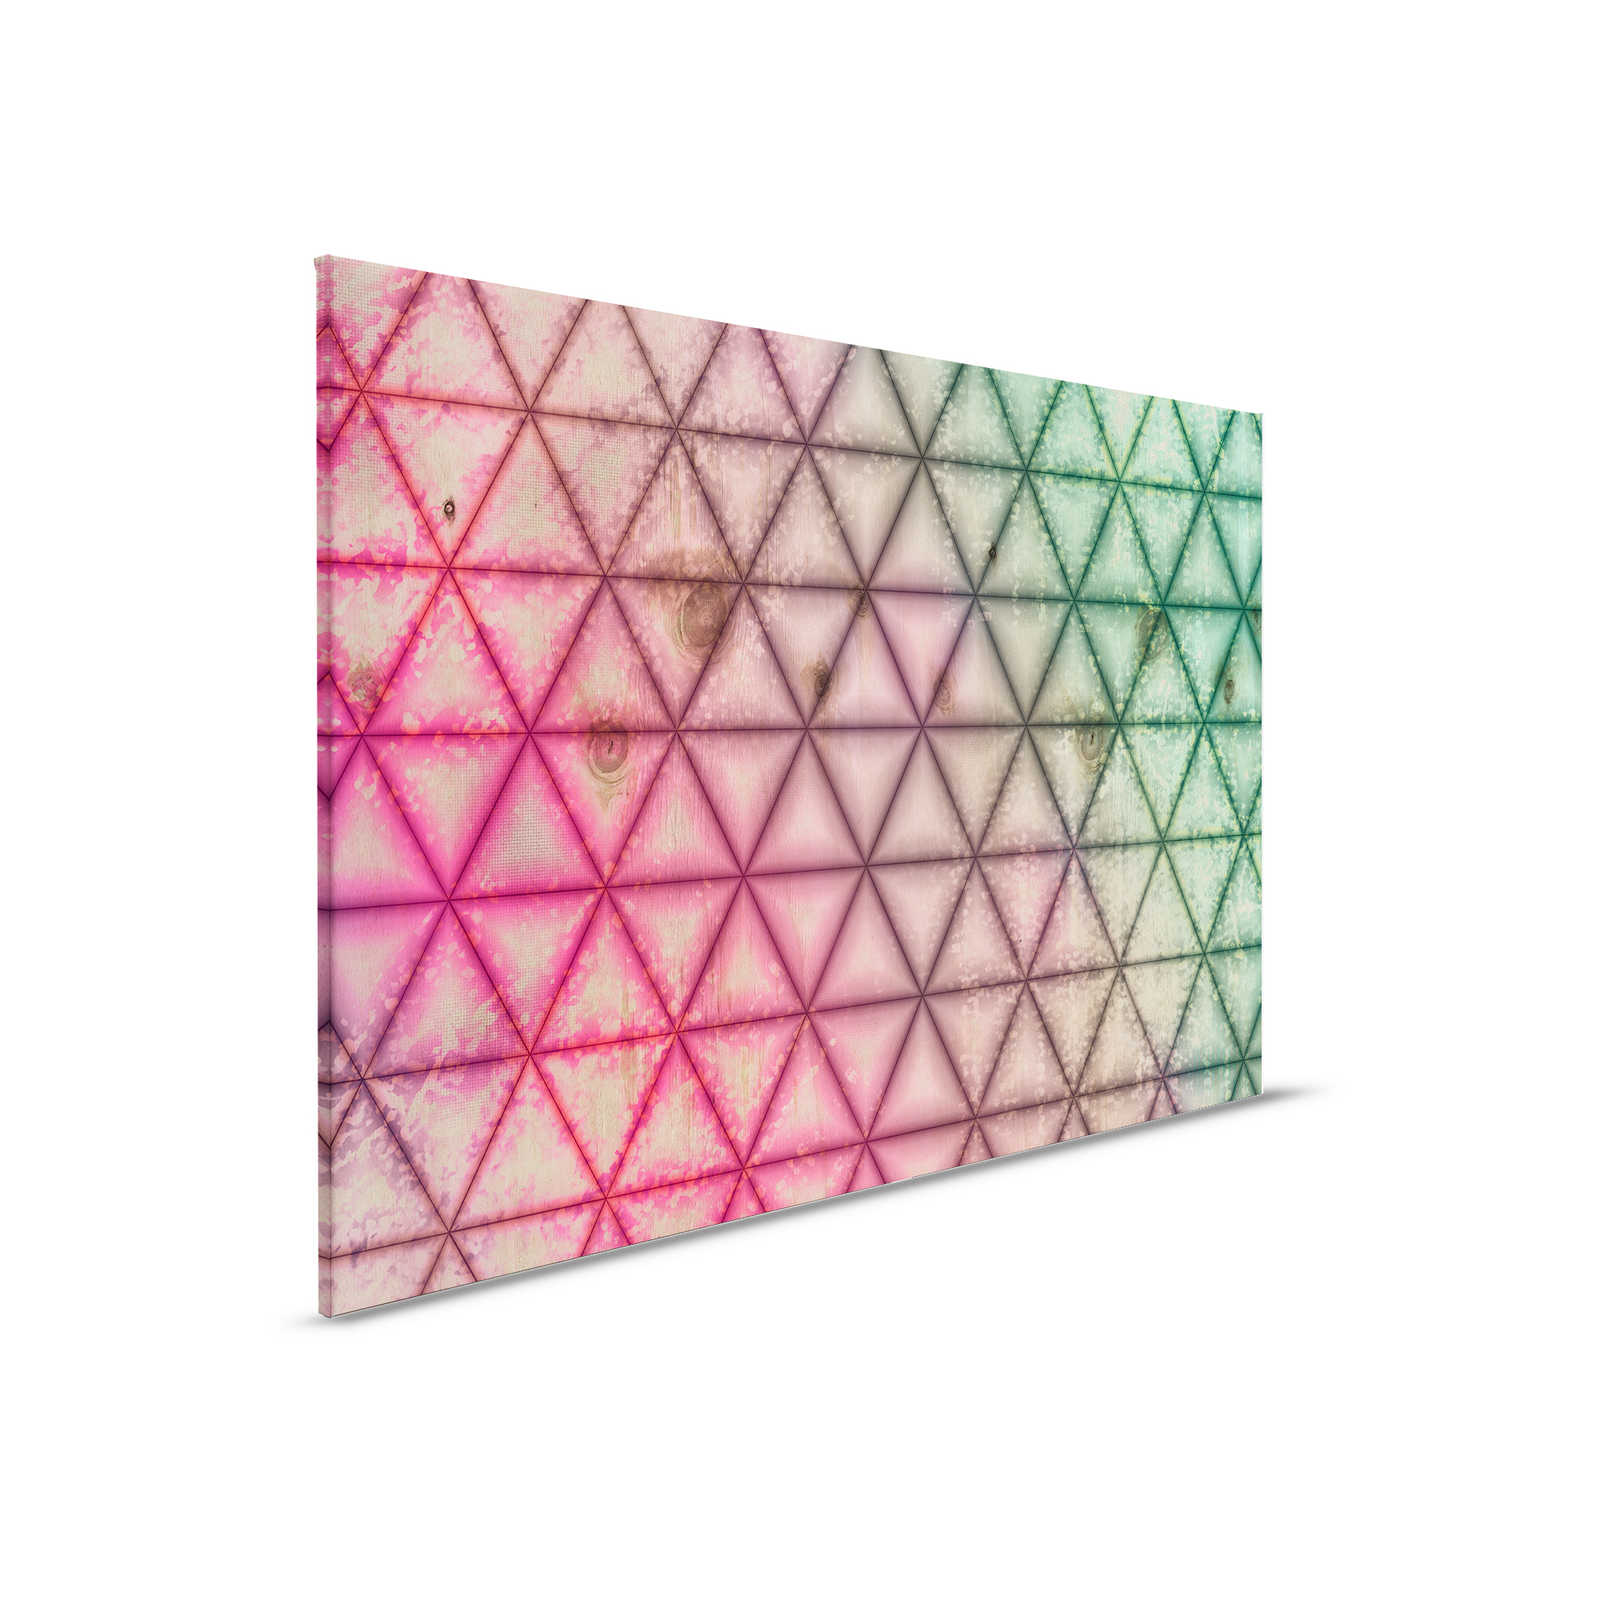         Canvas painting geometric triangle pattern in wood look | green, pink - 0,90 m x 0,60 m
    